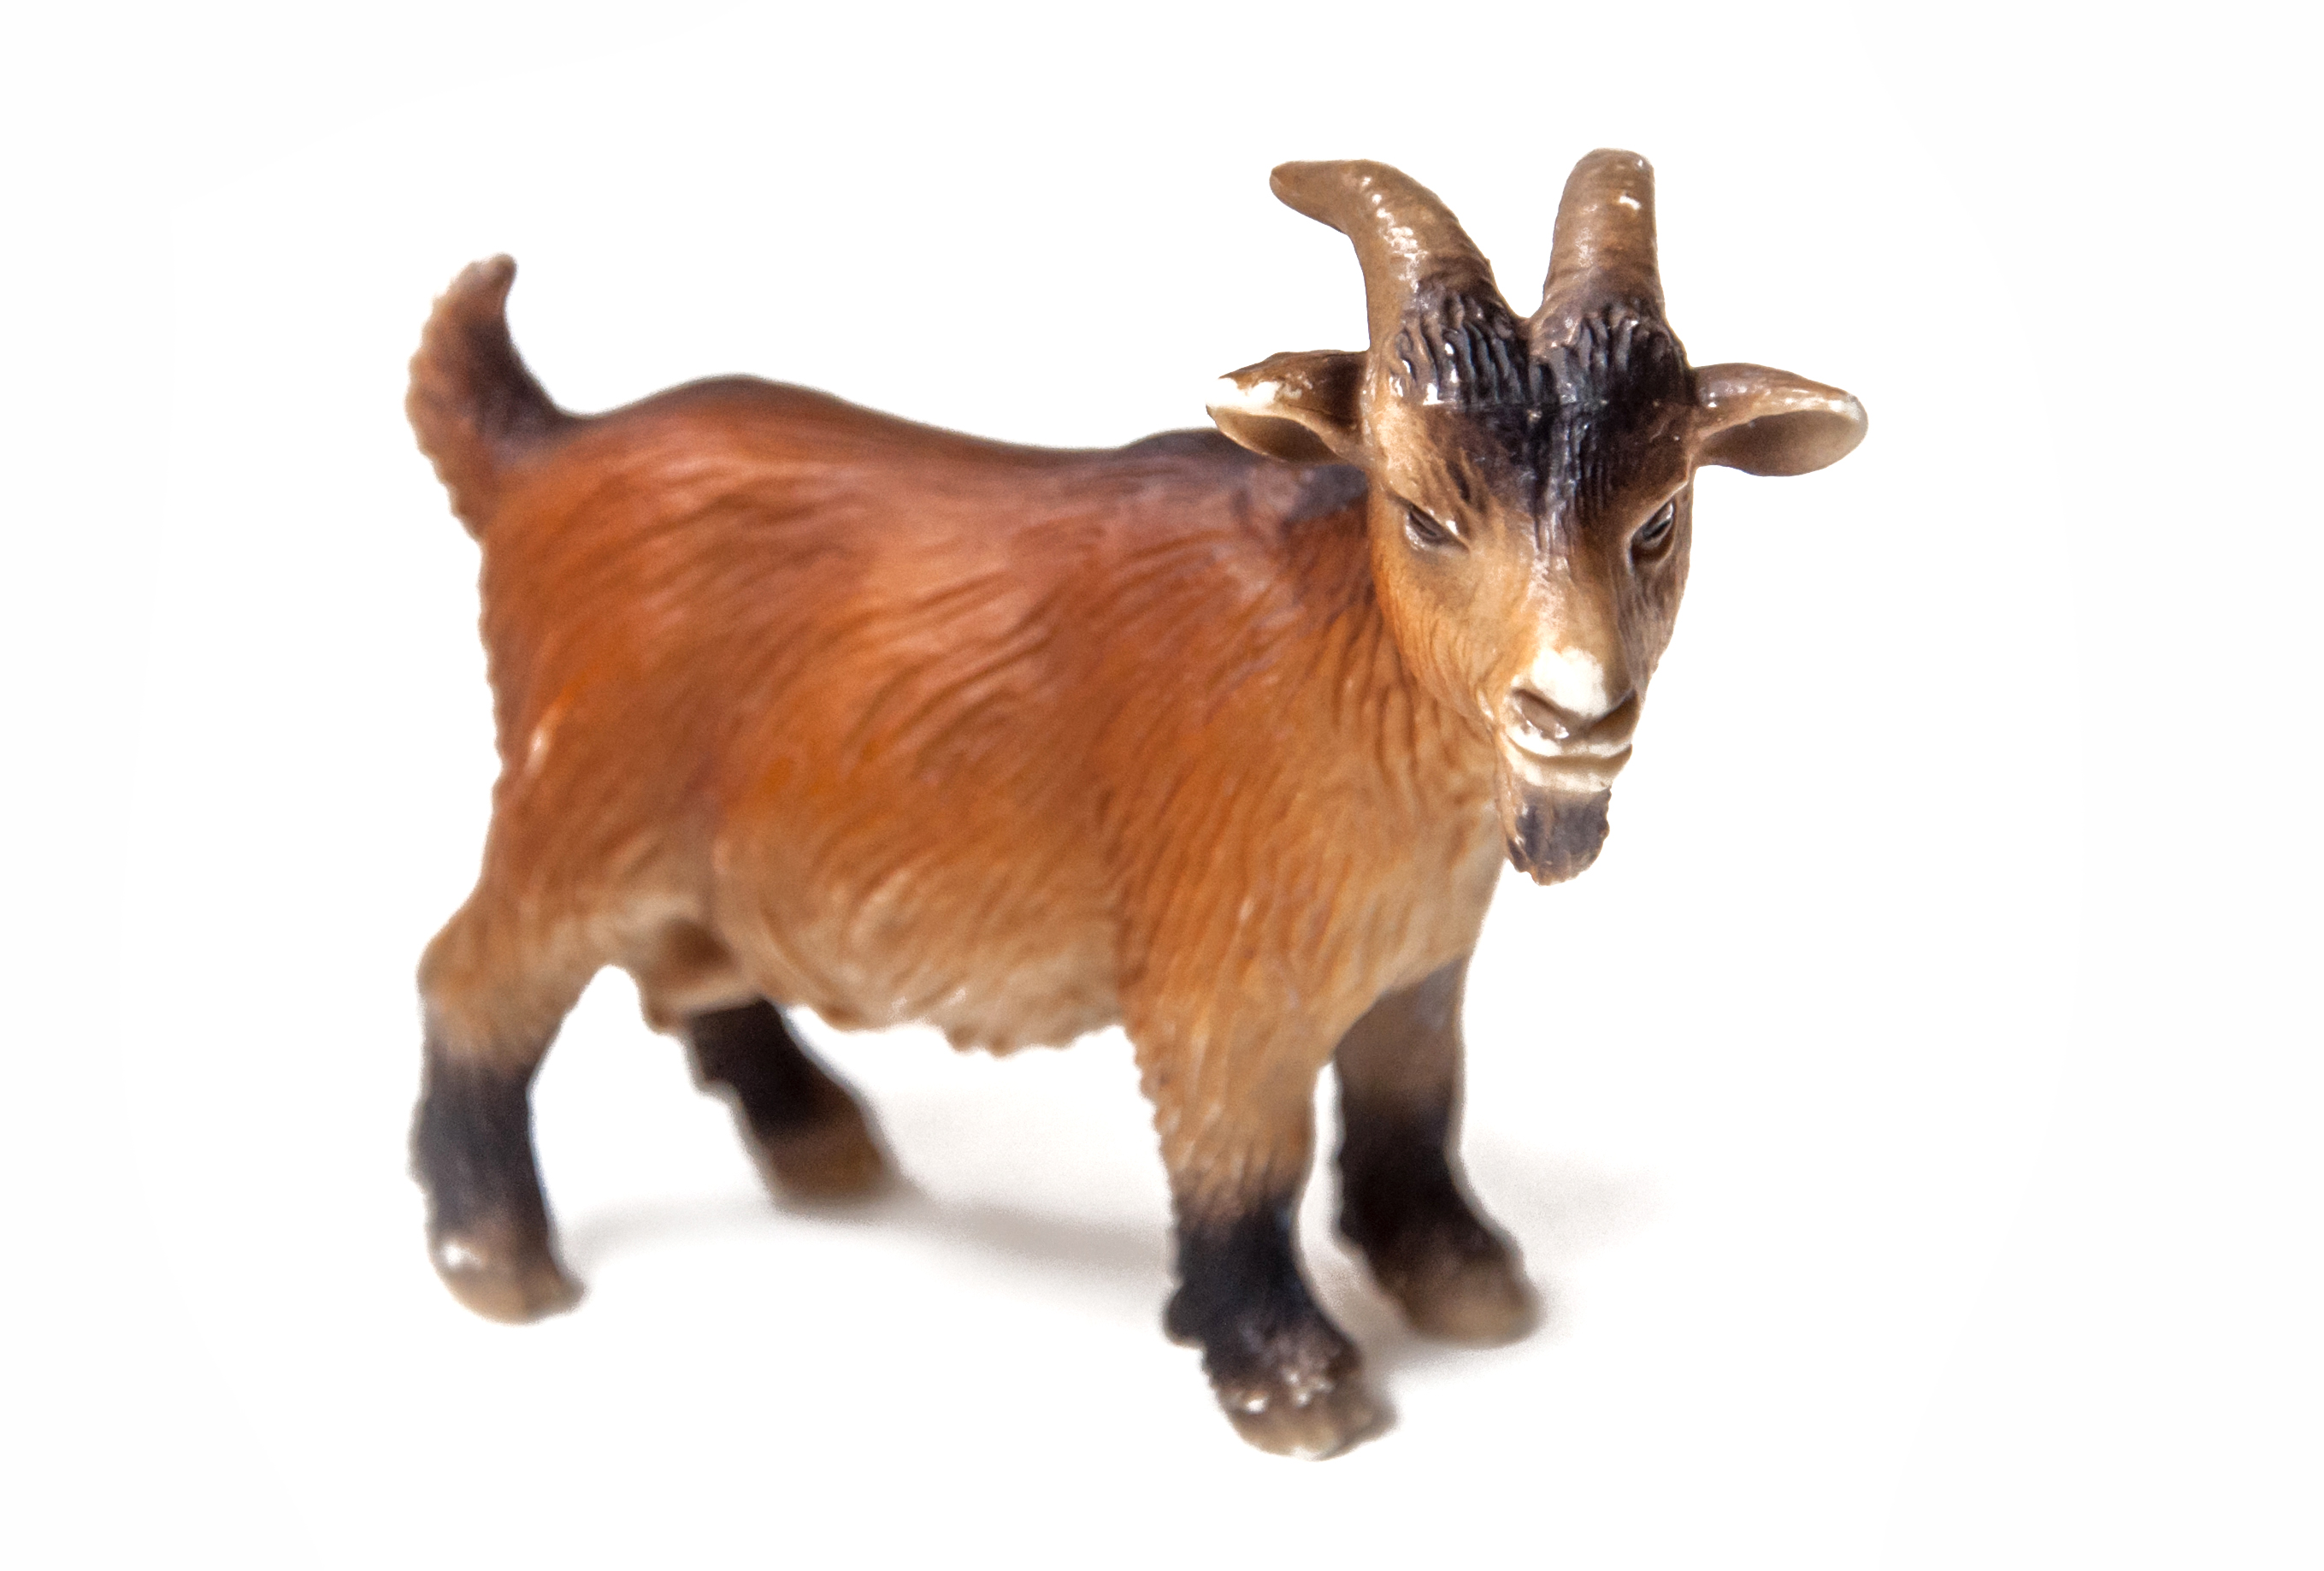 Goat plastic toy for kids, Animal, Unreal, Toy, Stand, HQ Photo